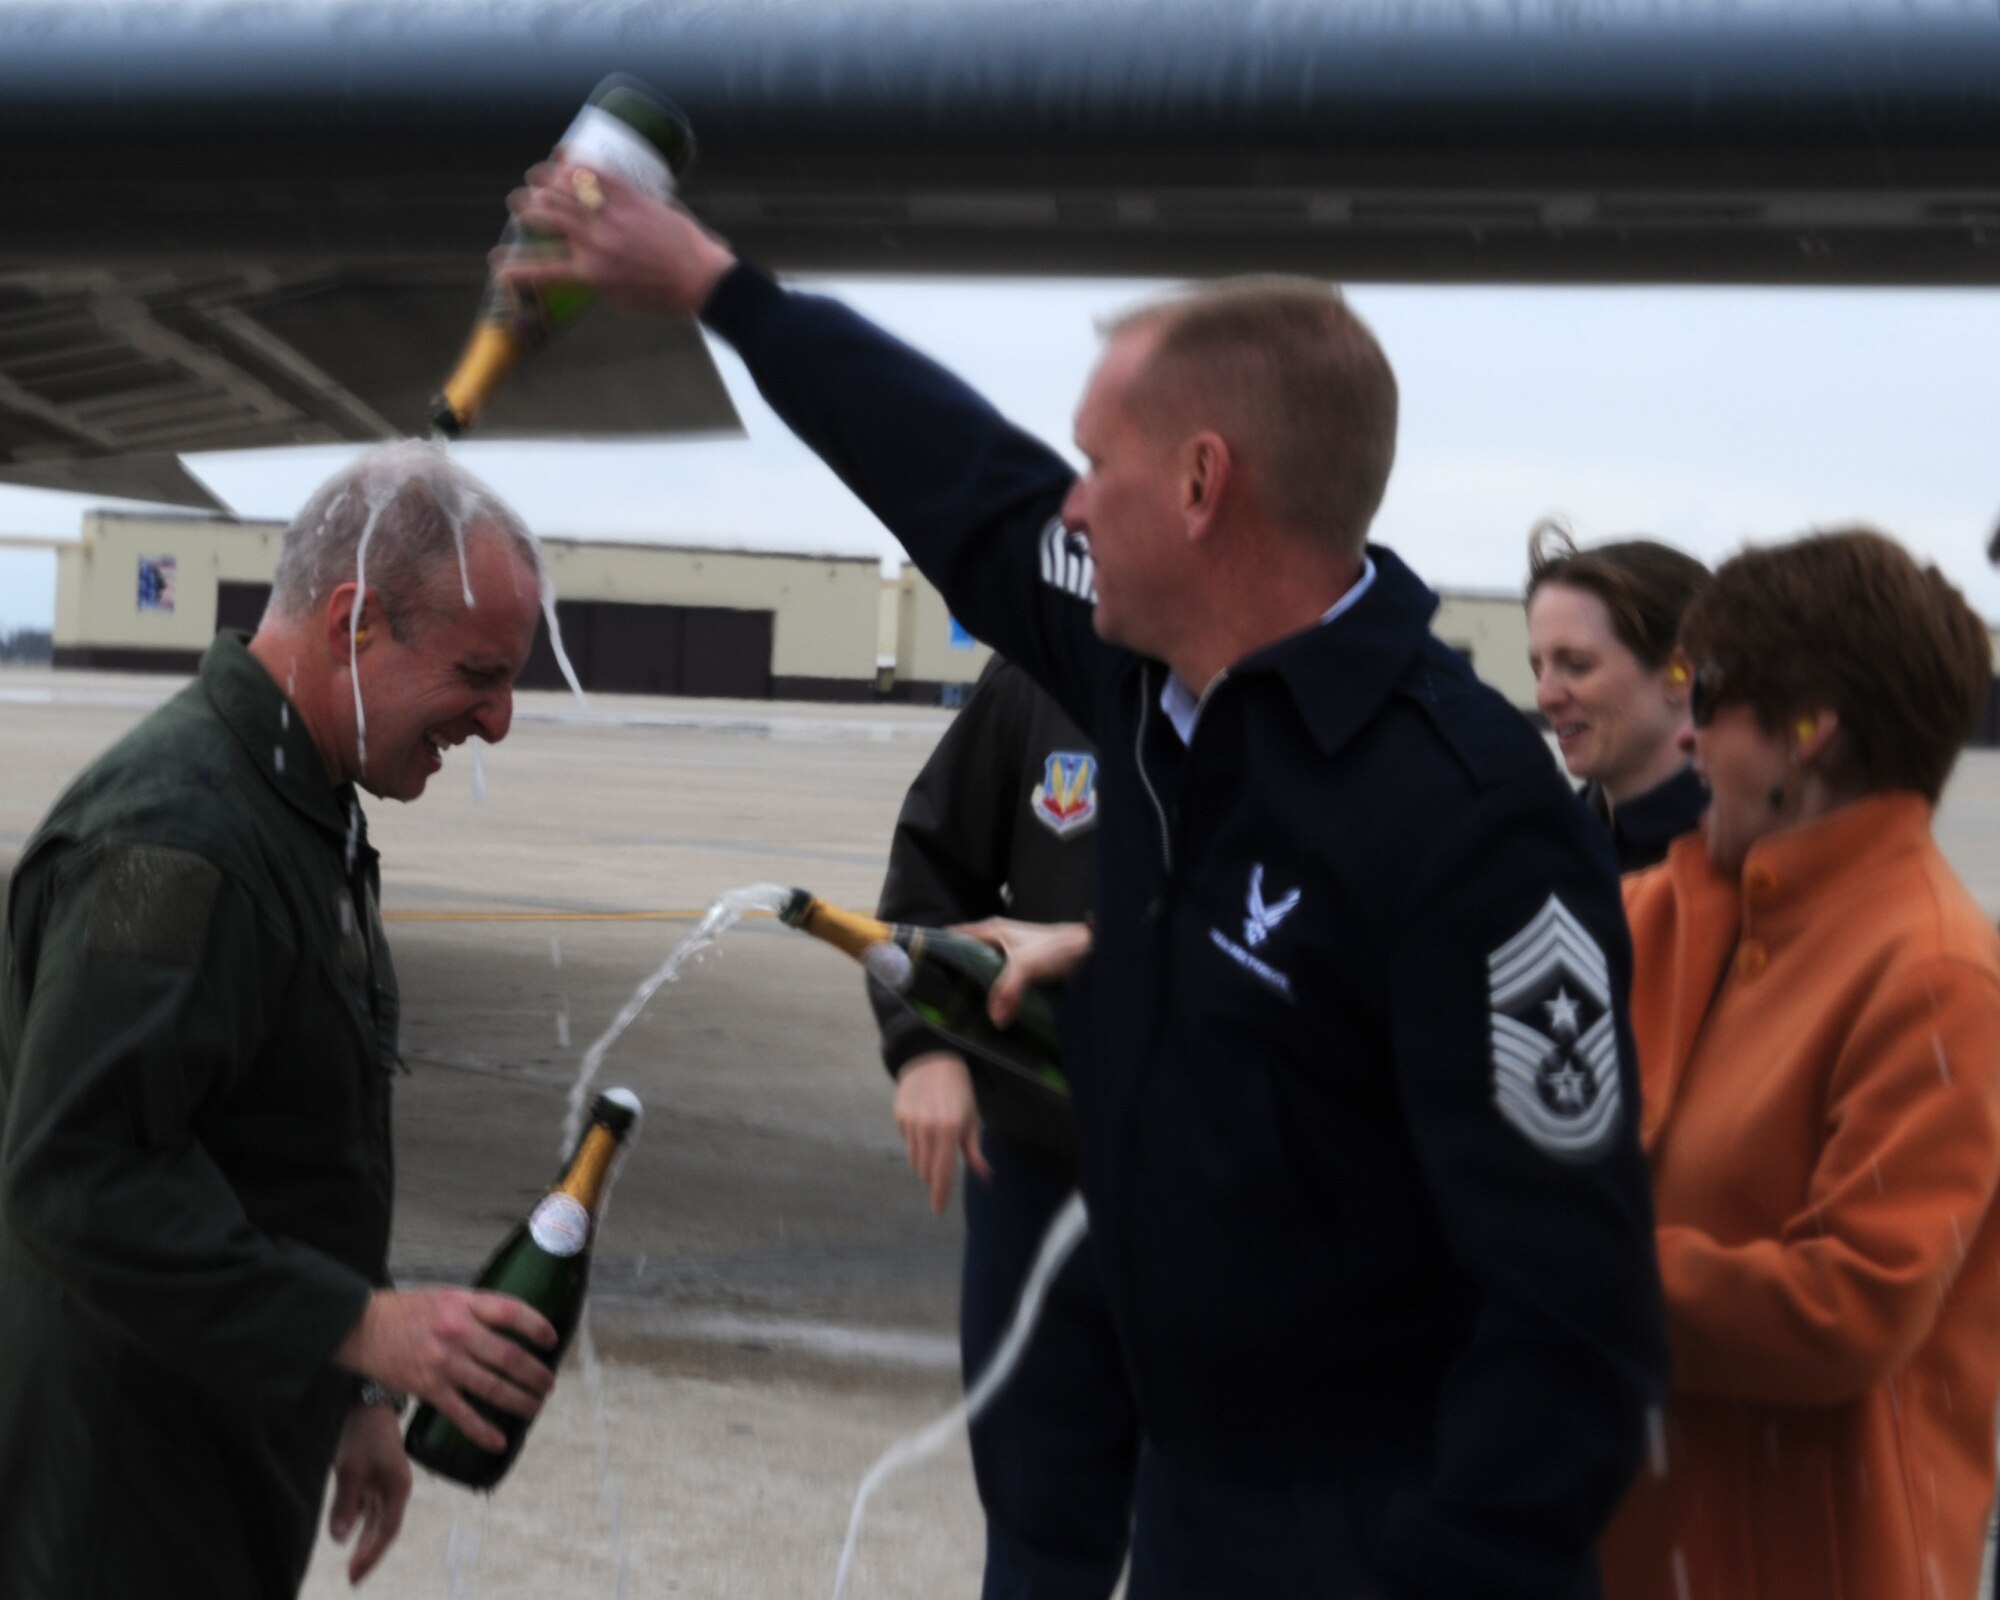 WHITEMAN AIR FORCE BASE, Mo. - Chief Master Sgt. Brian Hornback, 509th Bomb Wing command chief, pours champagne over Brig. Gen. Garrett Harencak, 509th Bomb Wing commander, following his end-of-tour B-2 flight March 9. General Harencak will pass command of the 509th BW to Col. Robert Wheeler, 2d Bomb Wing commander, Barksdale AFB, La., during a change-of-command ceremony March 26. (U.S. Air Force photo/Senior Airman Cory Todd)